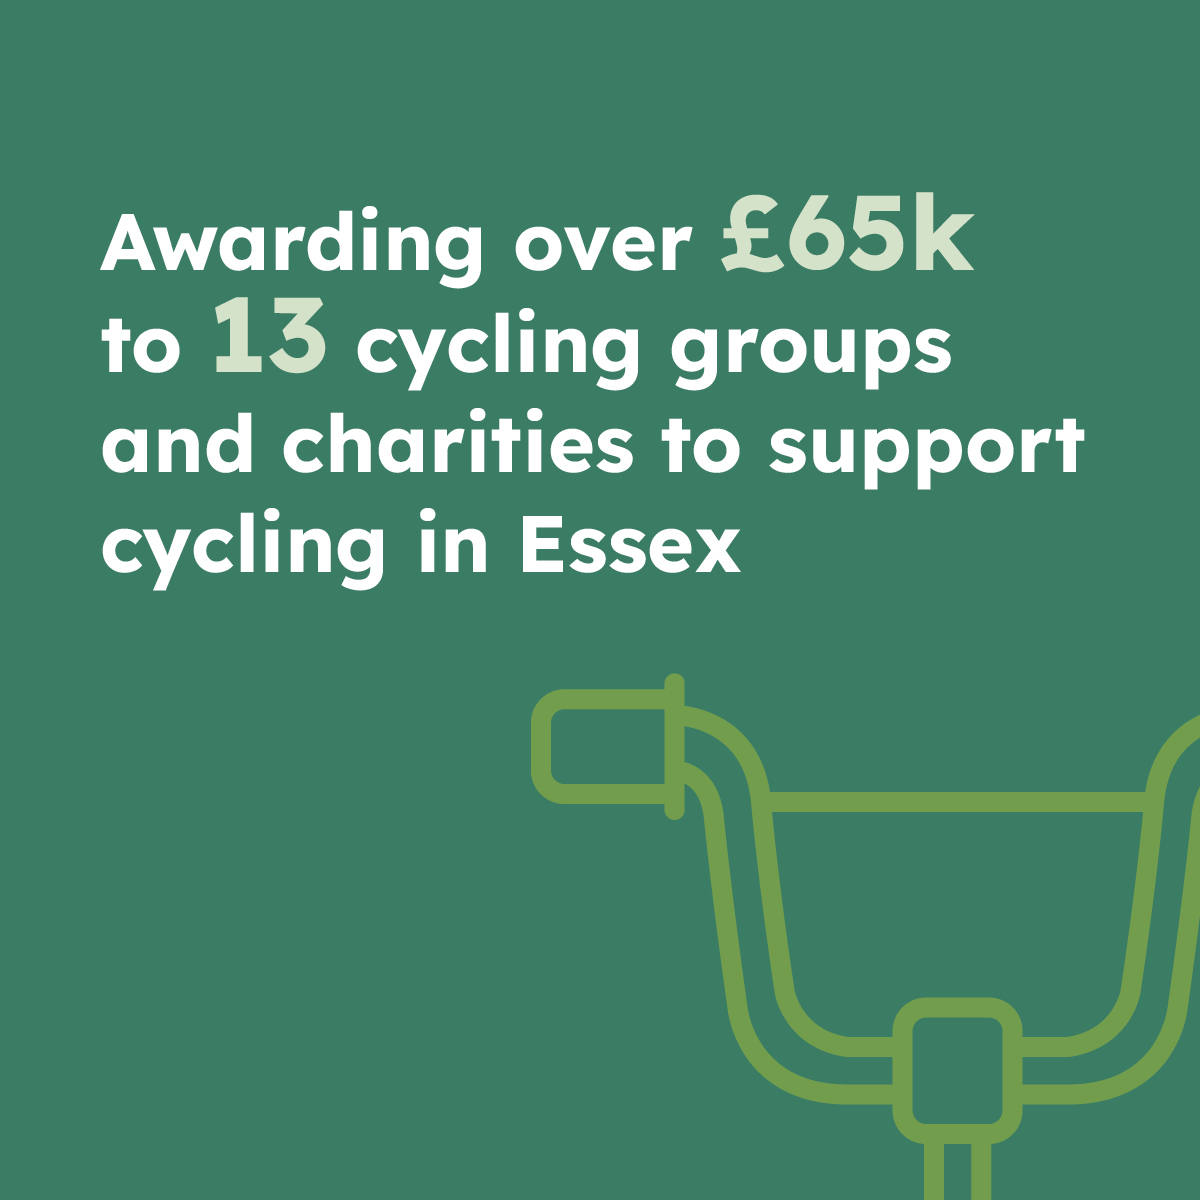 Awarding over £65k to 13 cycling groups and charities to support cycling in Essex